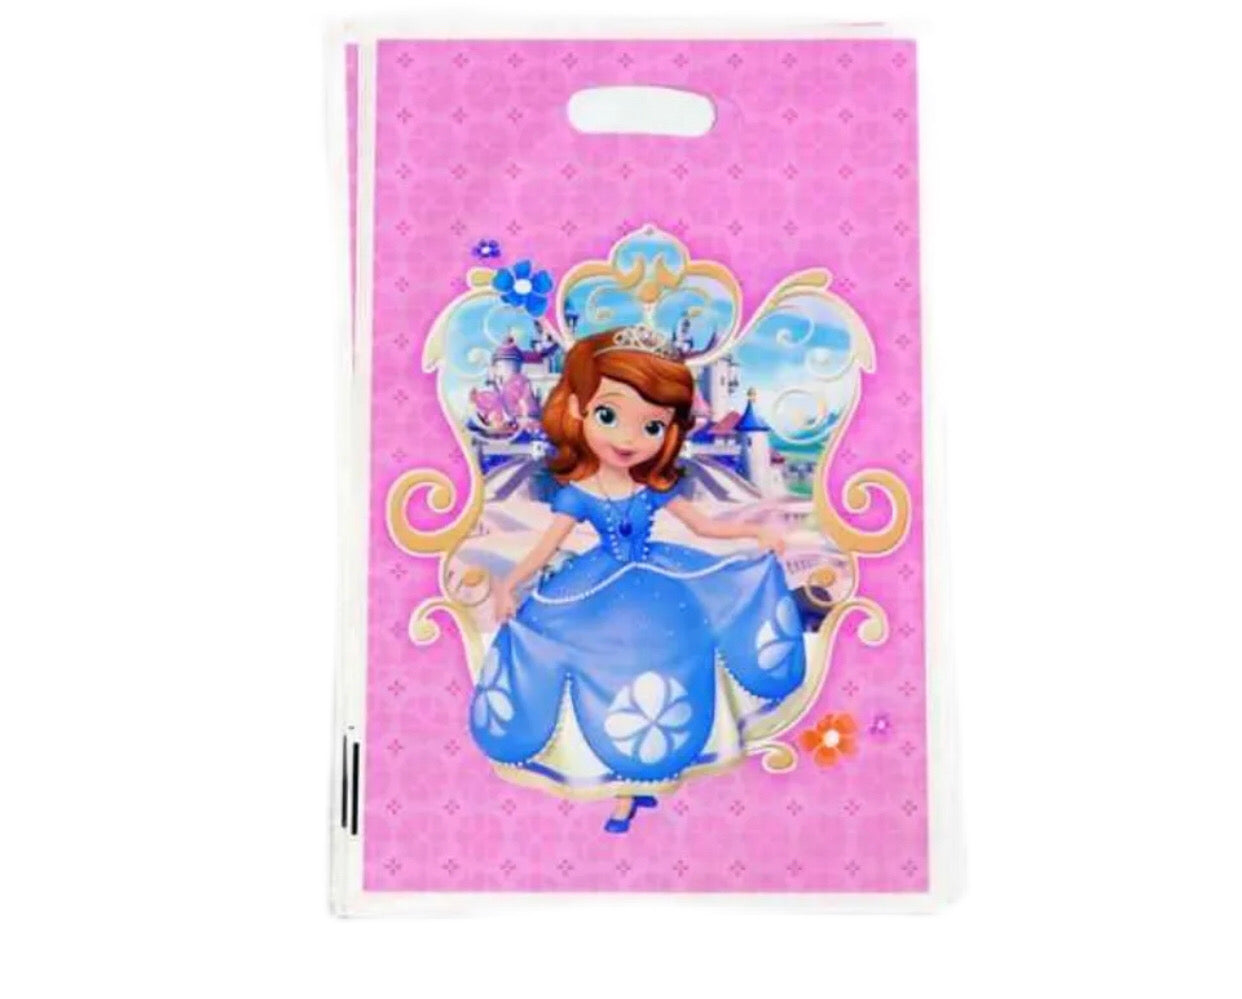 Happy Birthday Party loot bag - Sofia the First V&N Goodies Galore